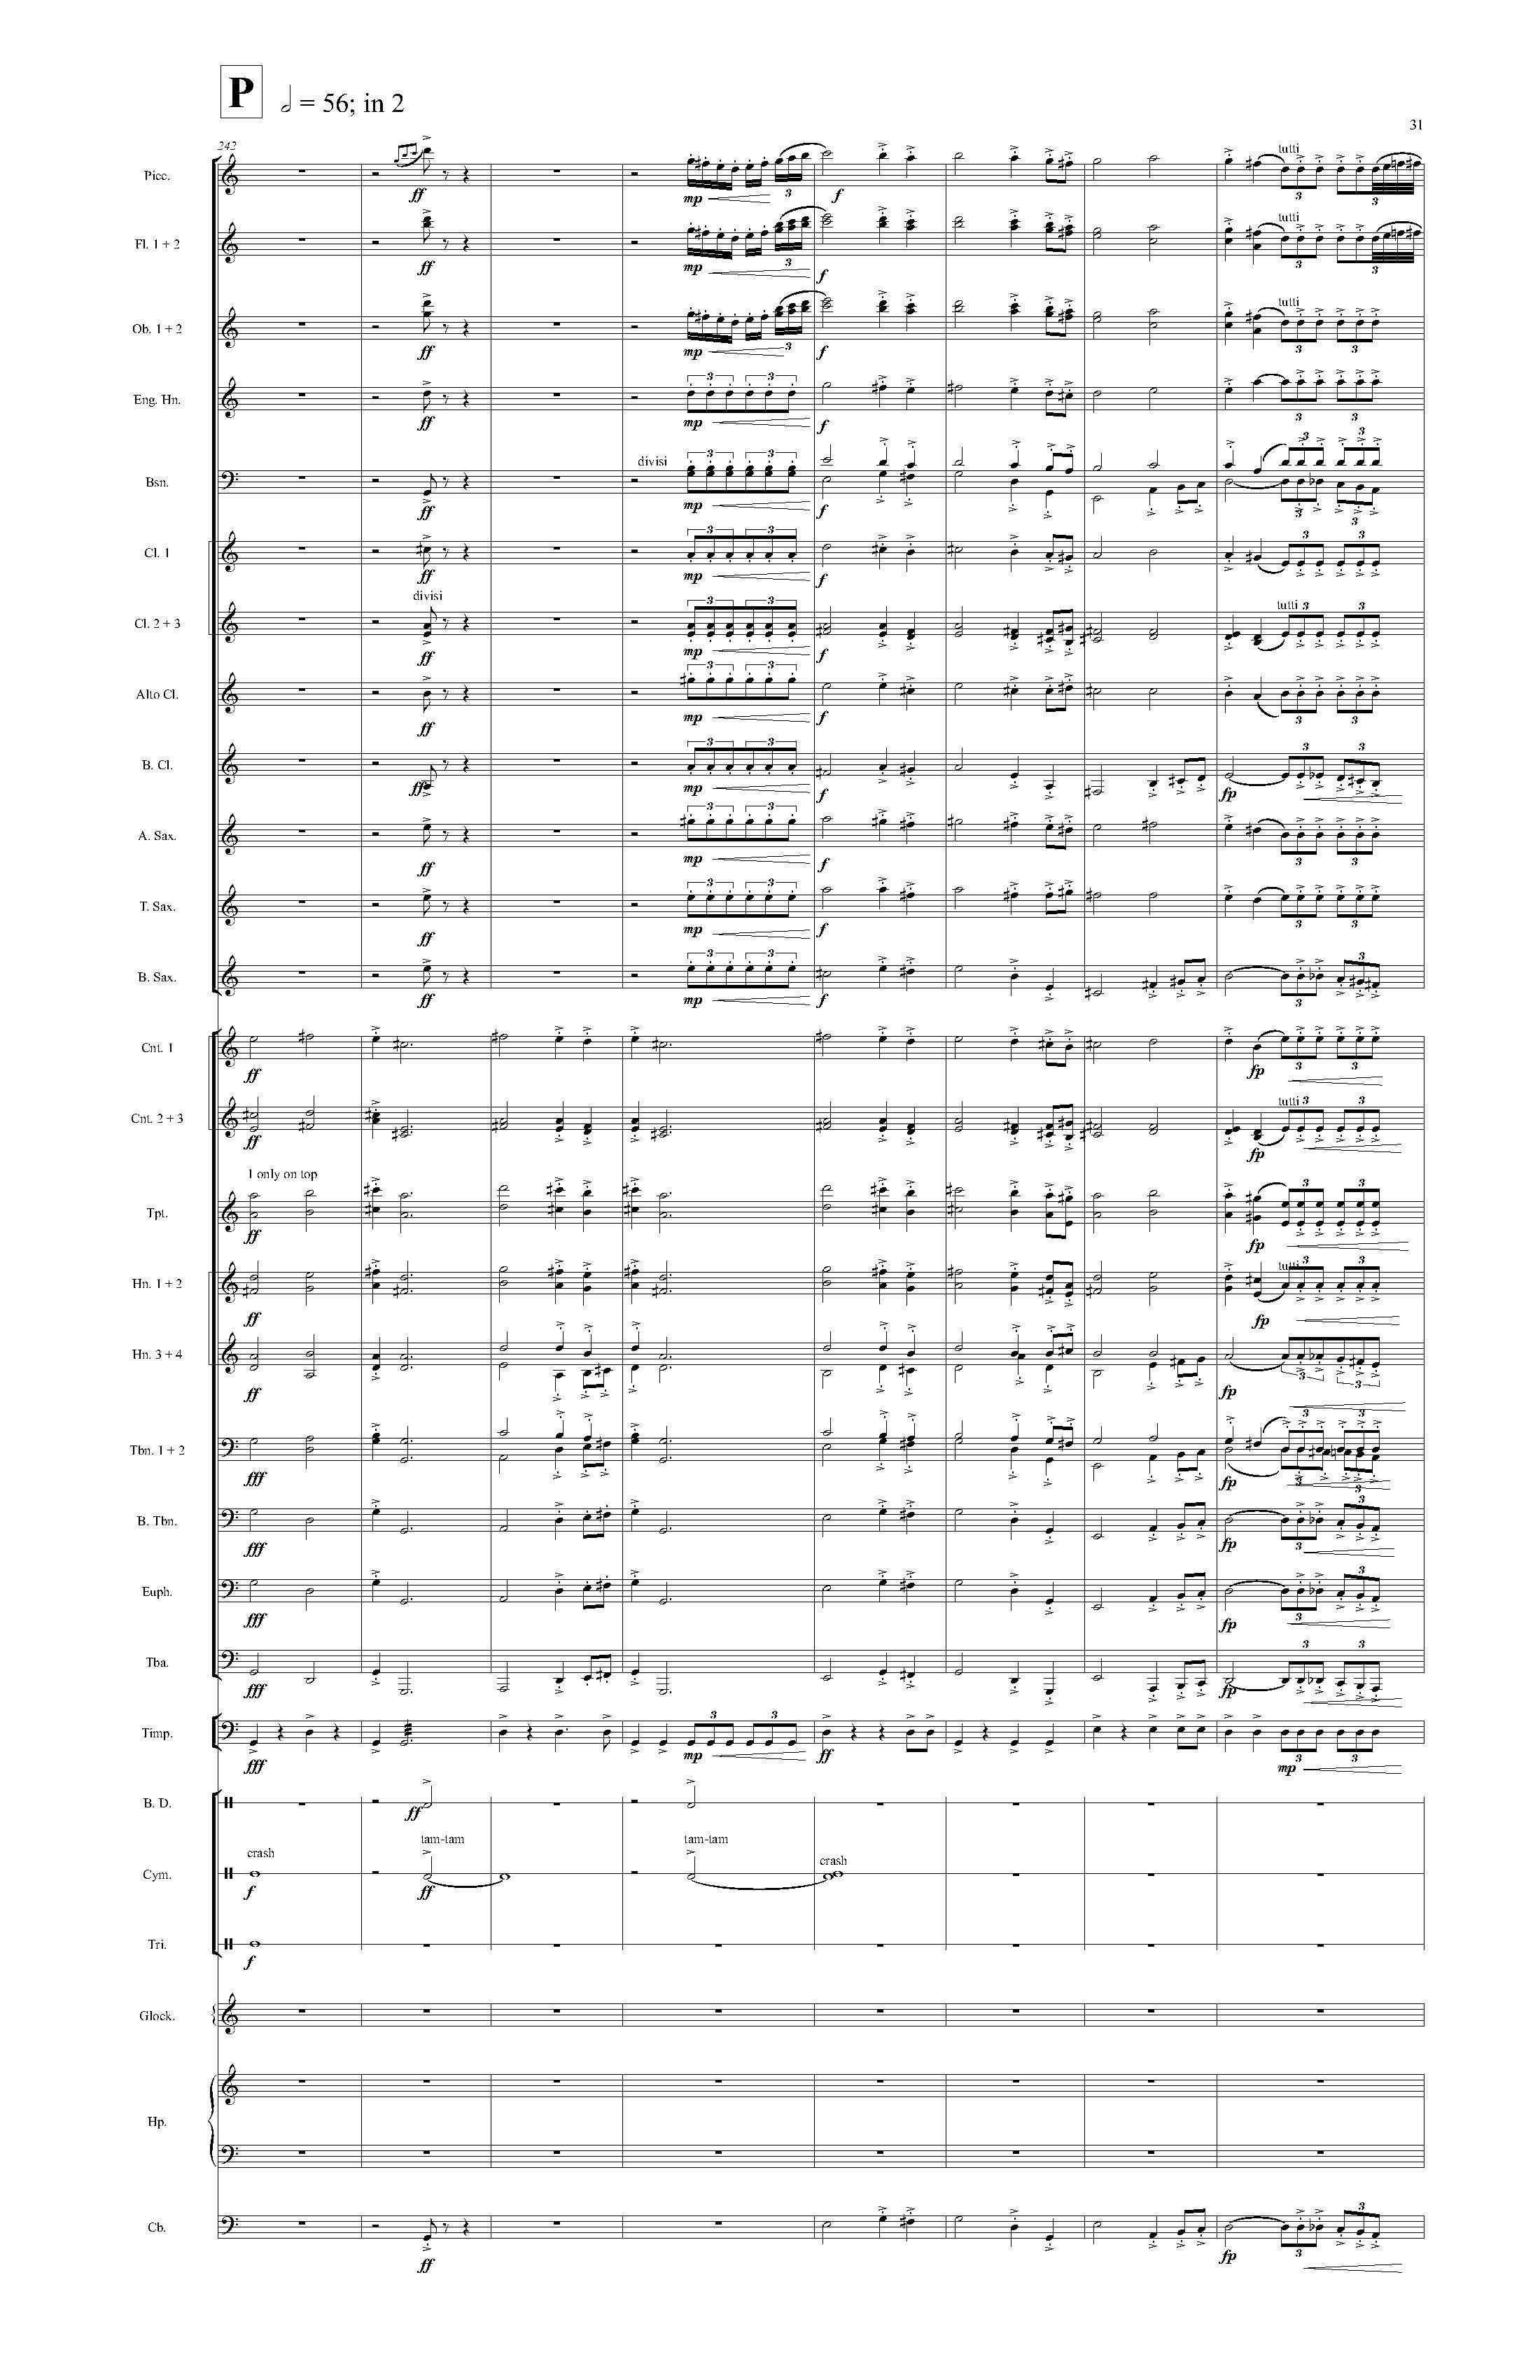 Psyche - Complete Score_Page_37.jpg